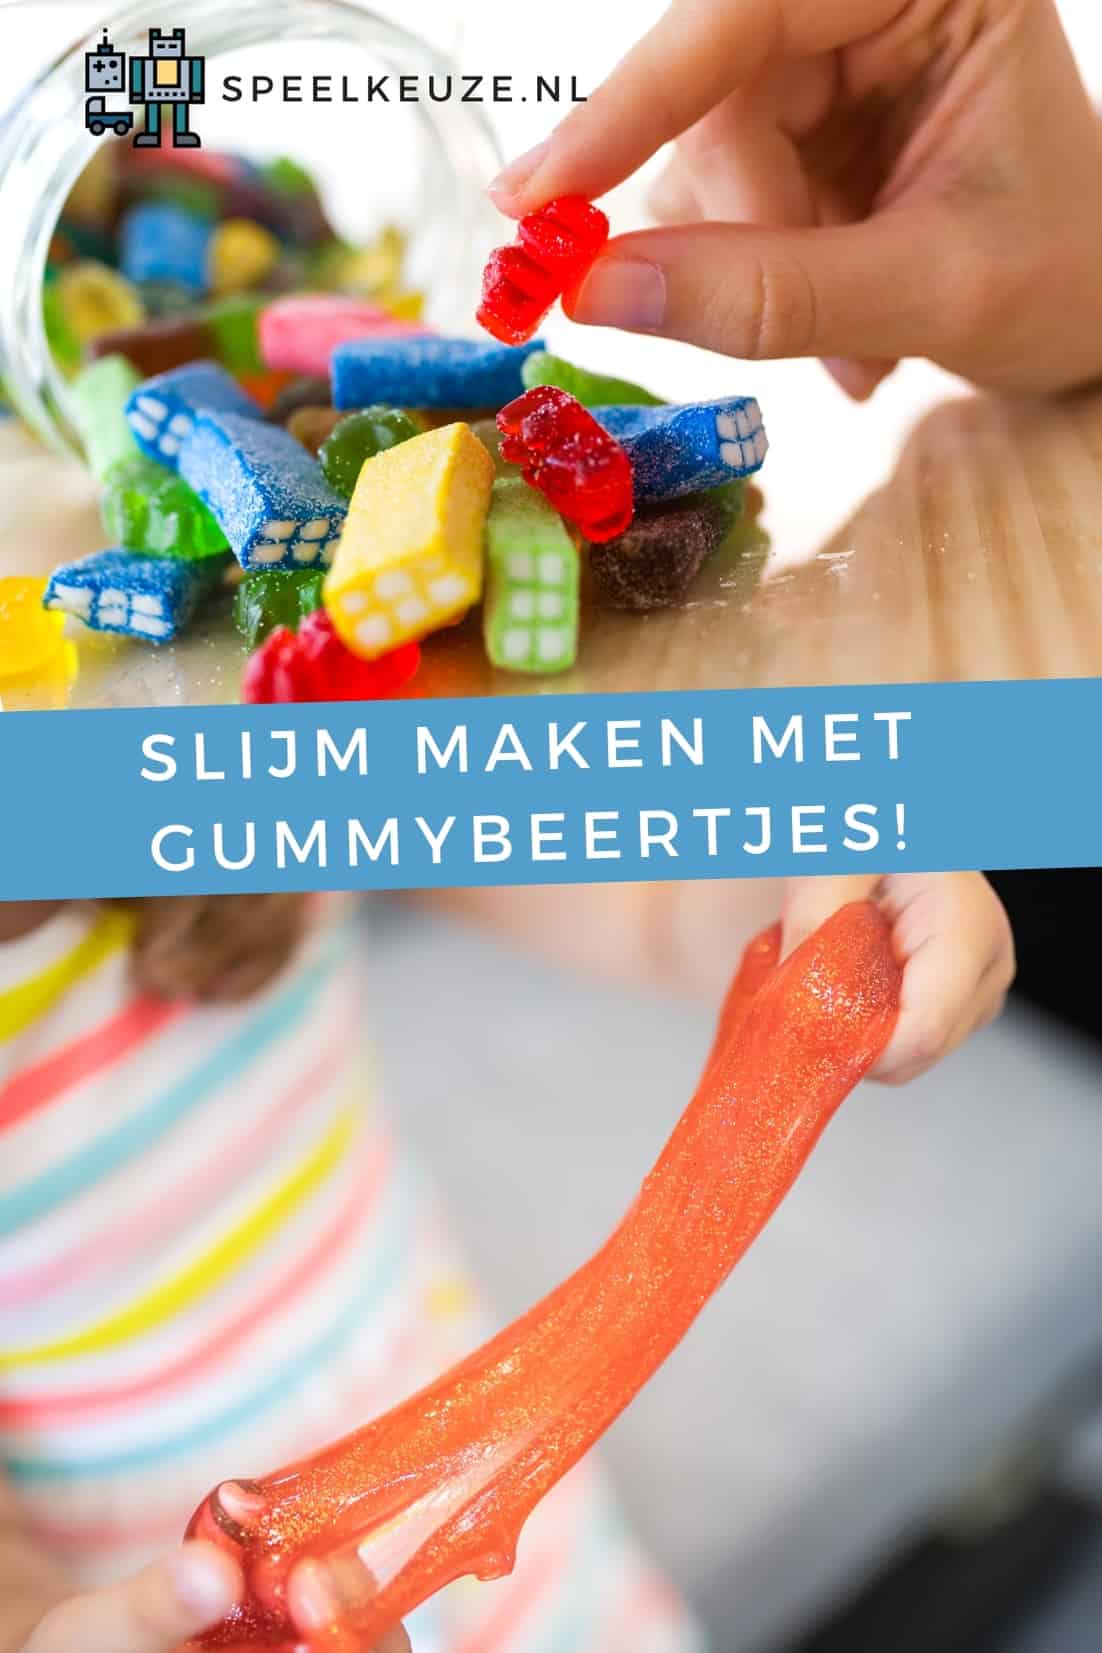 Making slime with gummy bears